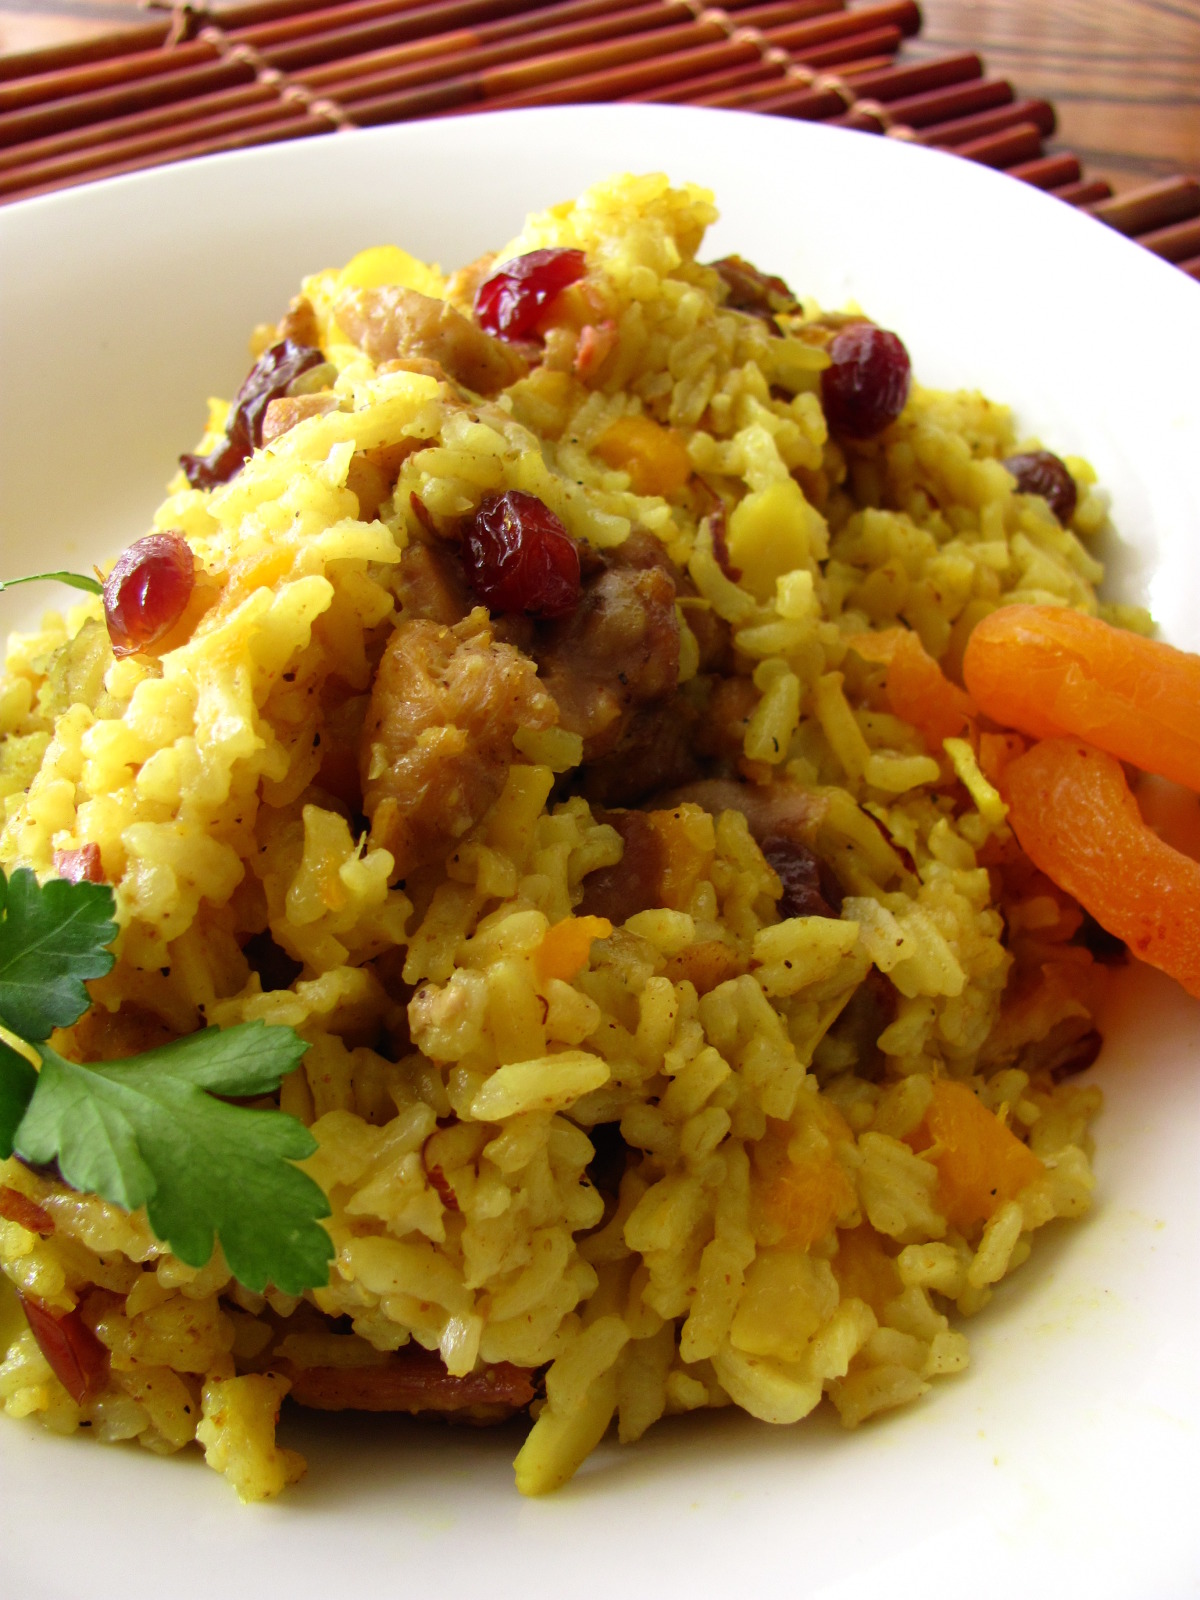 Savory Curried Rice With Dried Fruit image